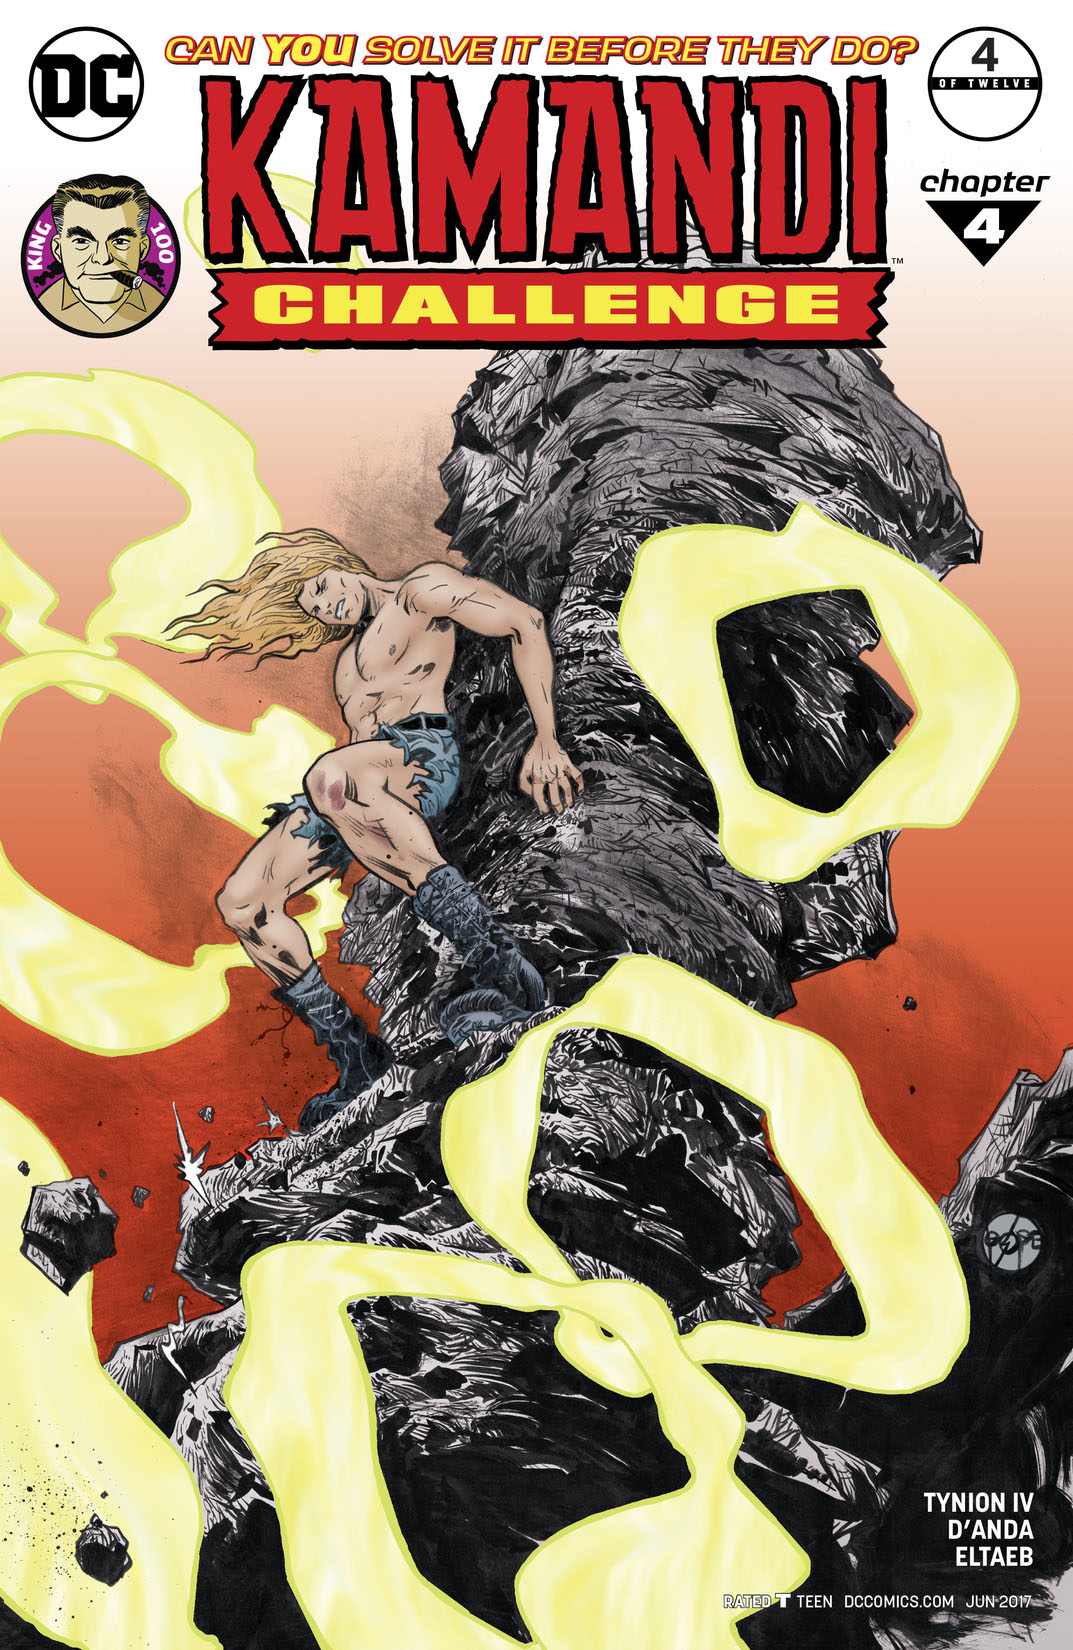 The Kamandi Challenge #4 preview images